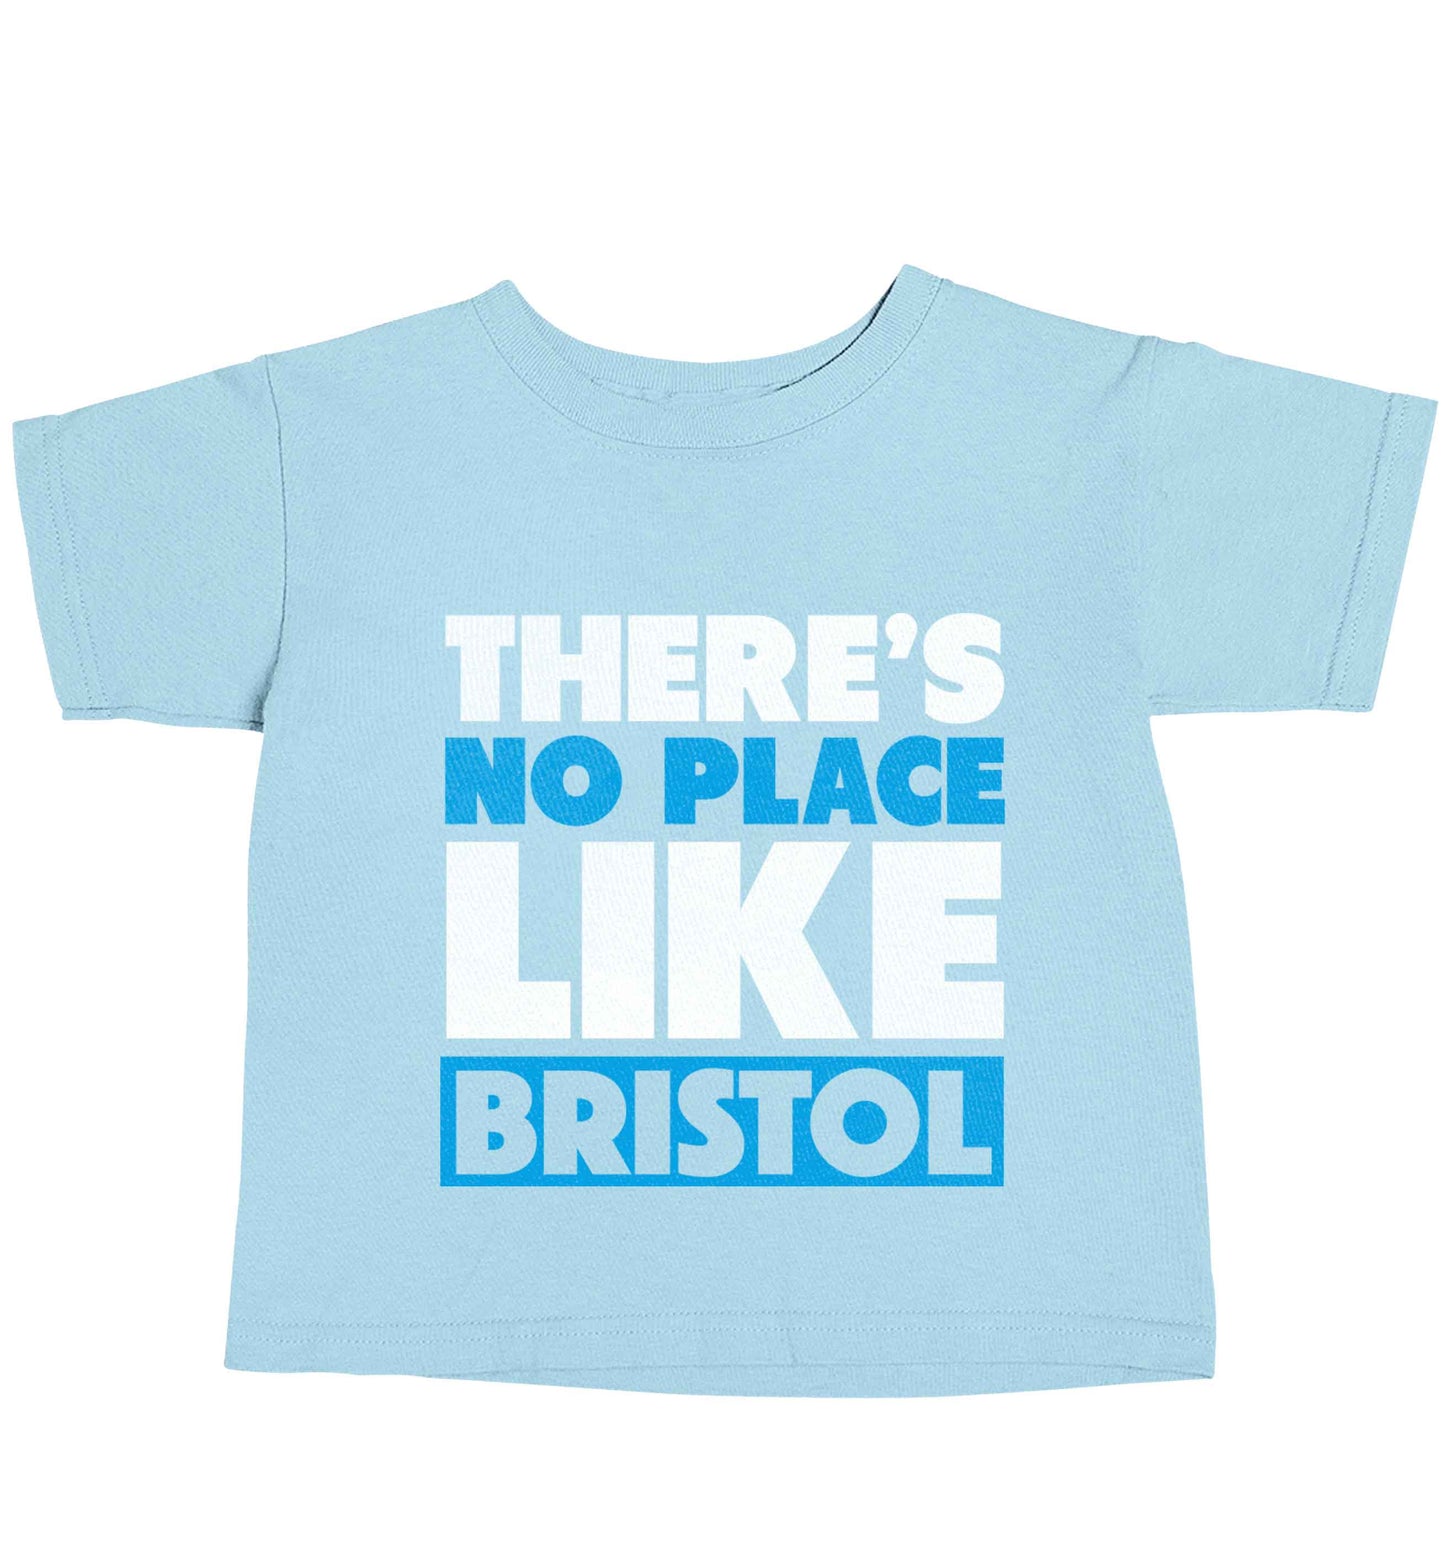 There's no place like Bristol light blue baby toddler Tshirt 2 Years